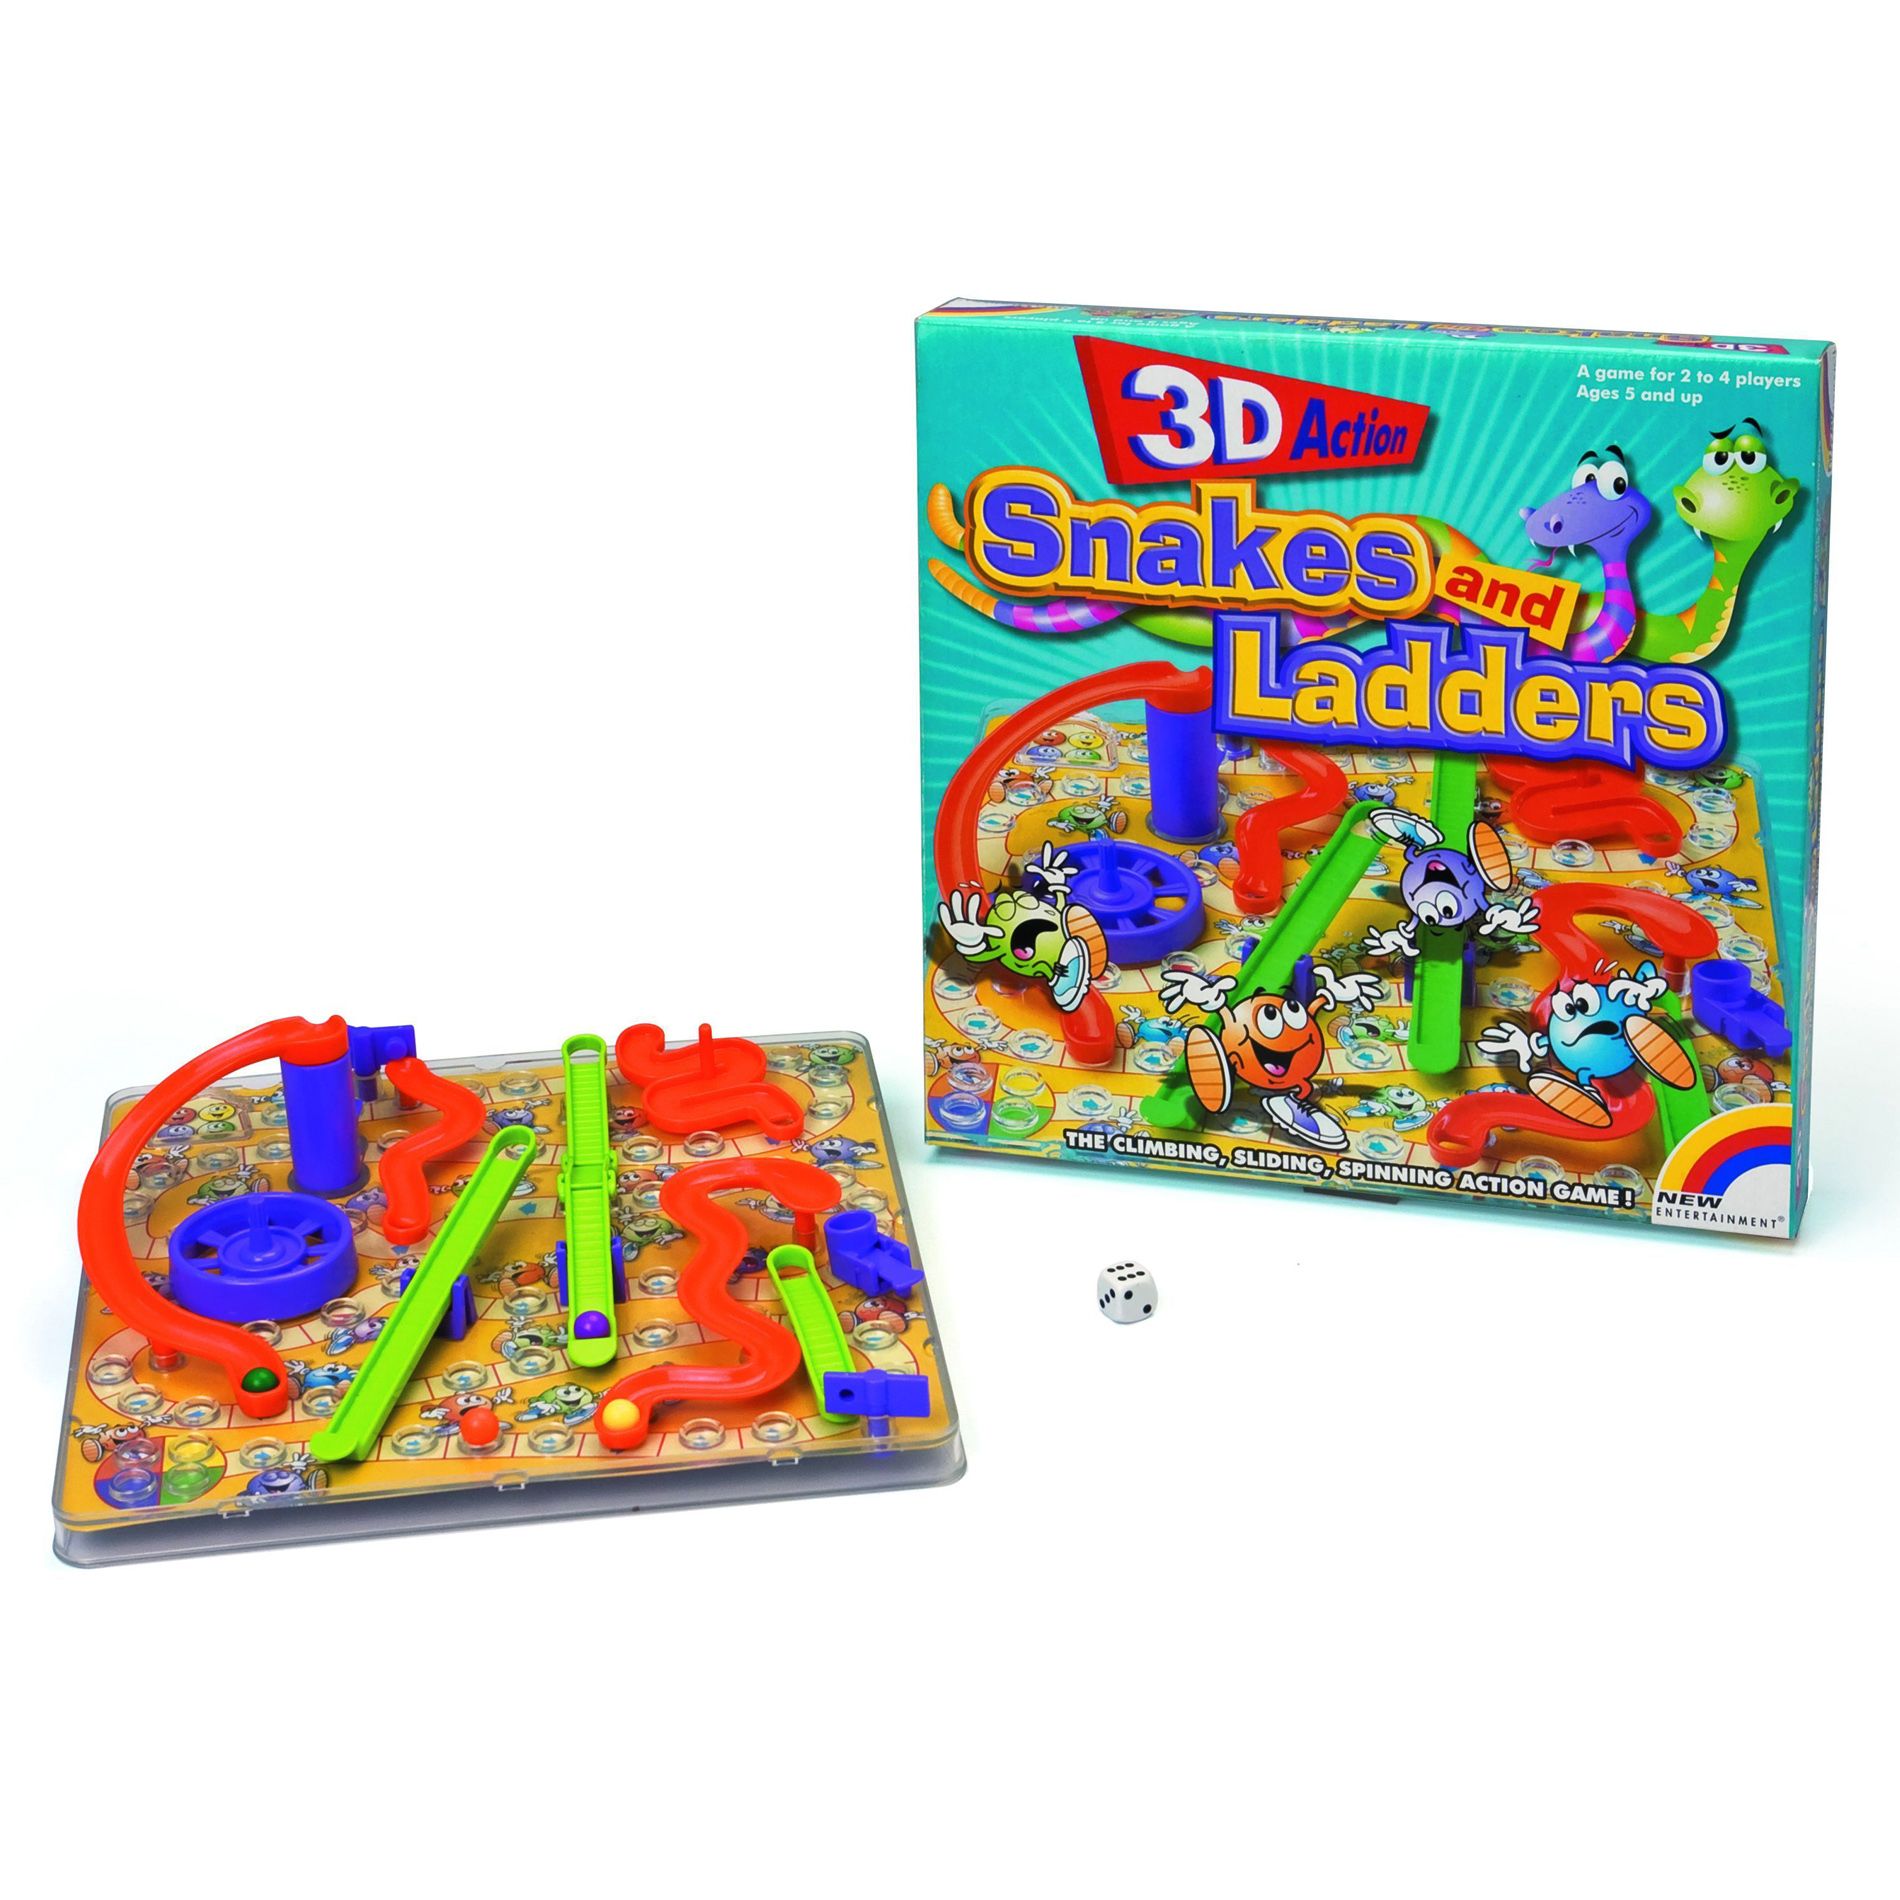 Intex 3D Snakes and Ladders Board Game